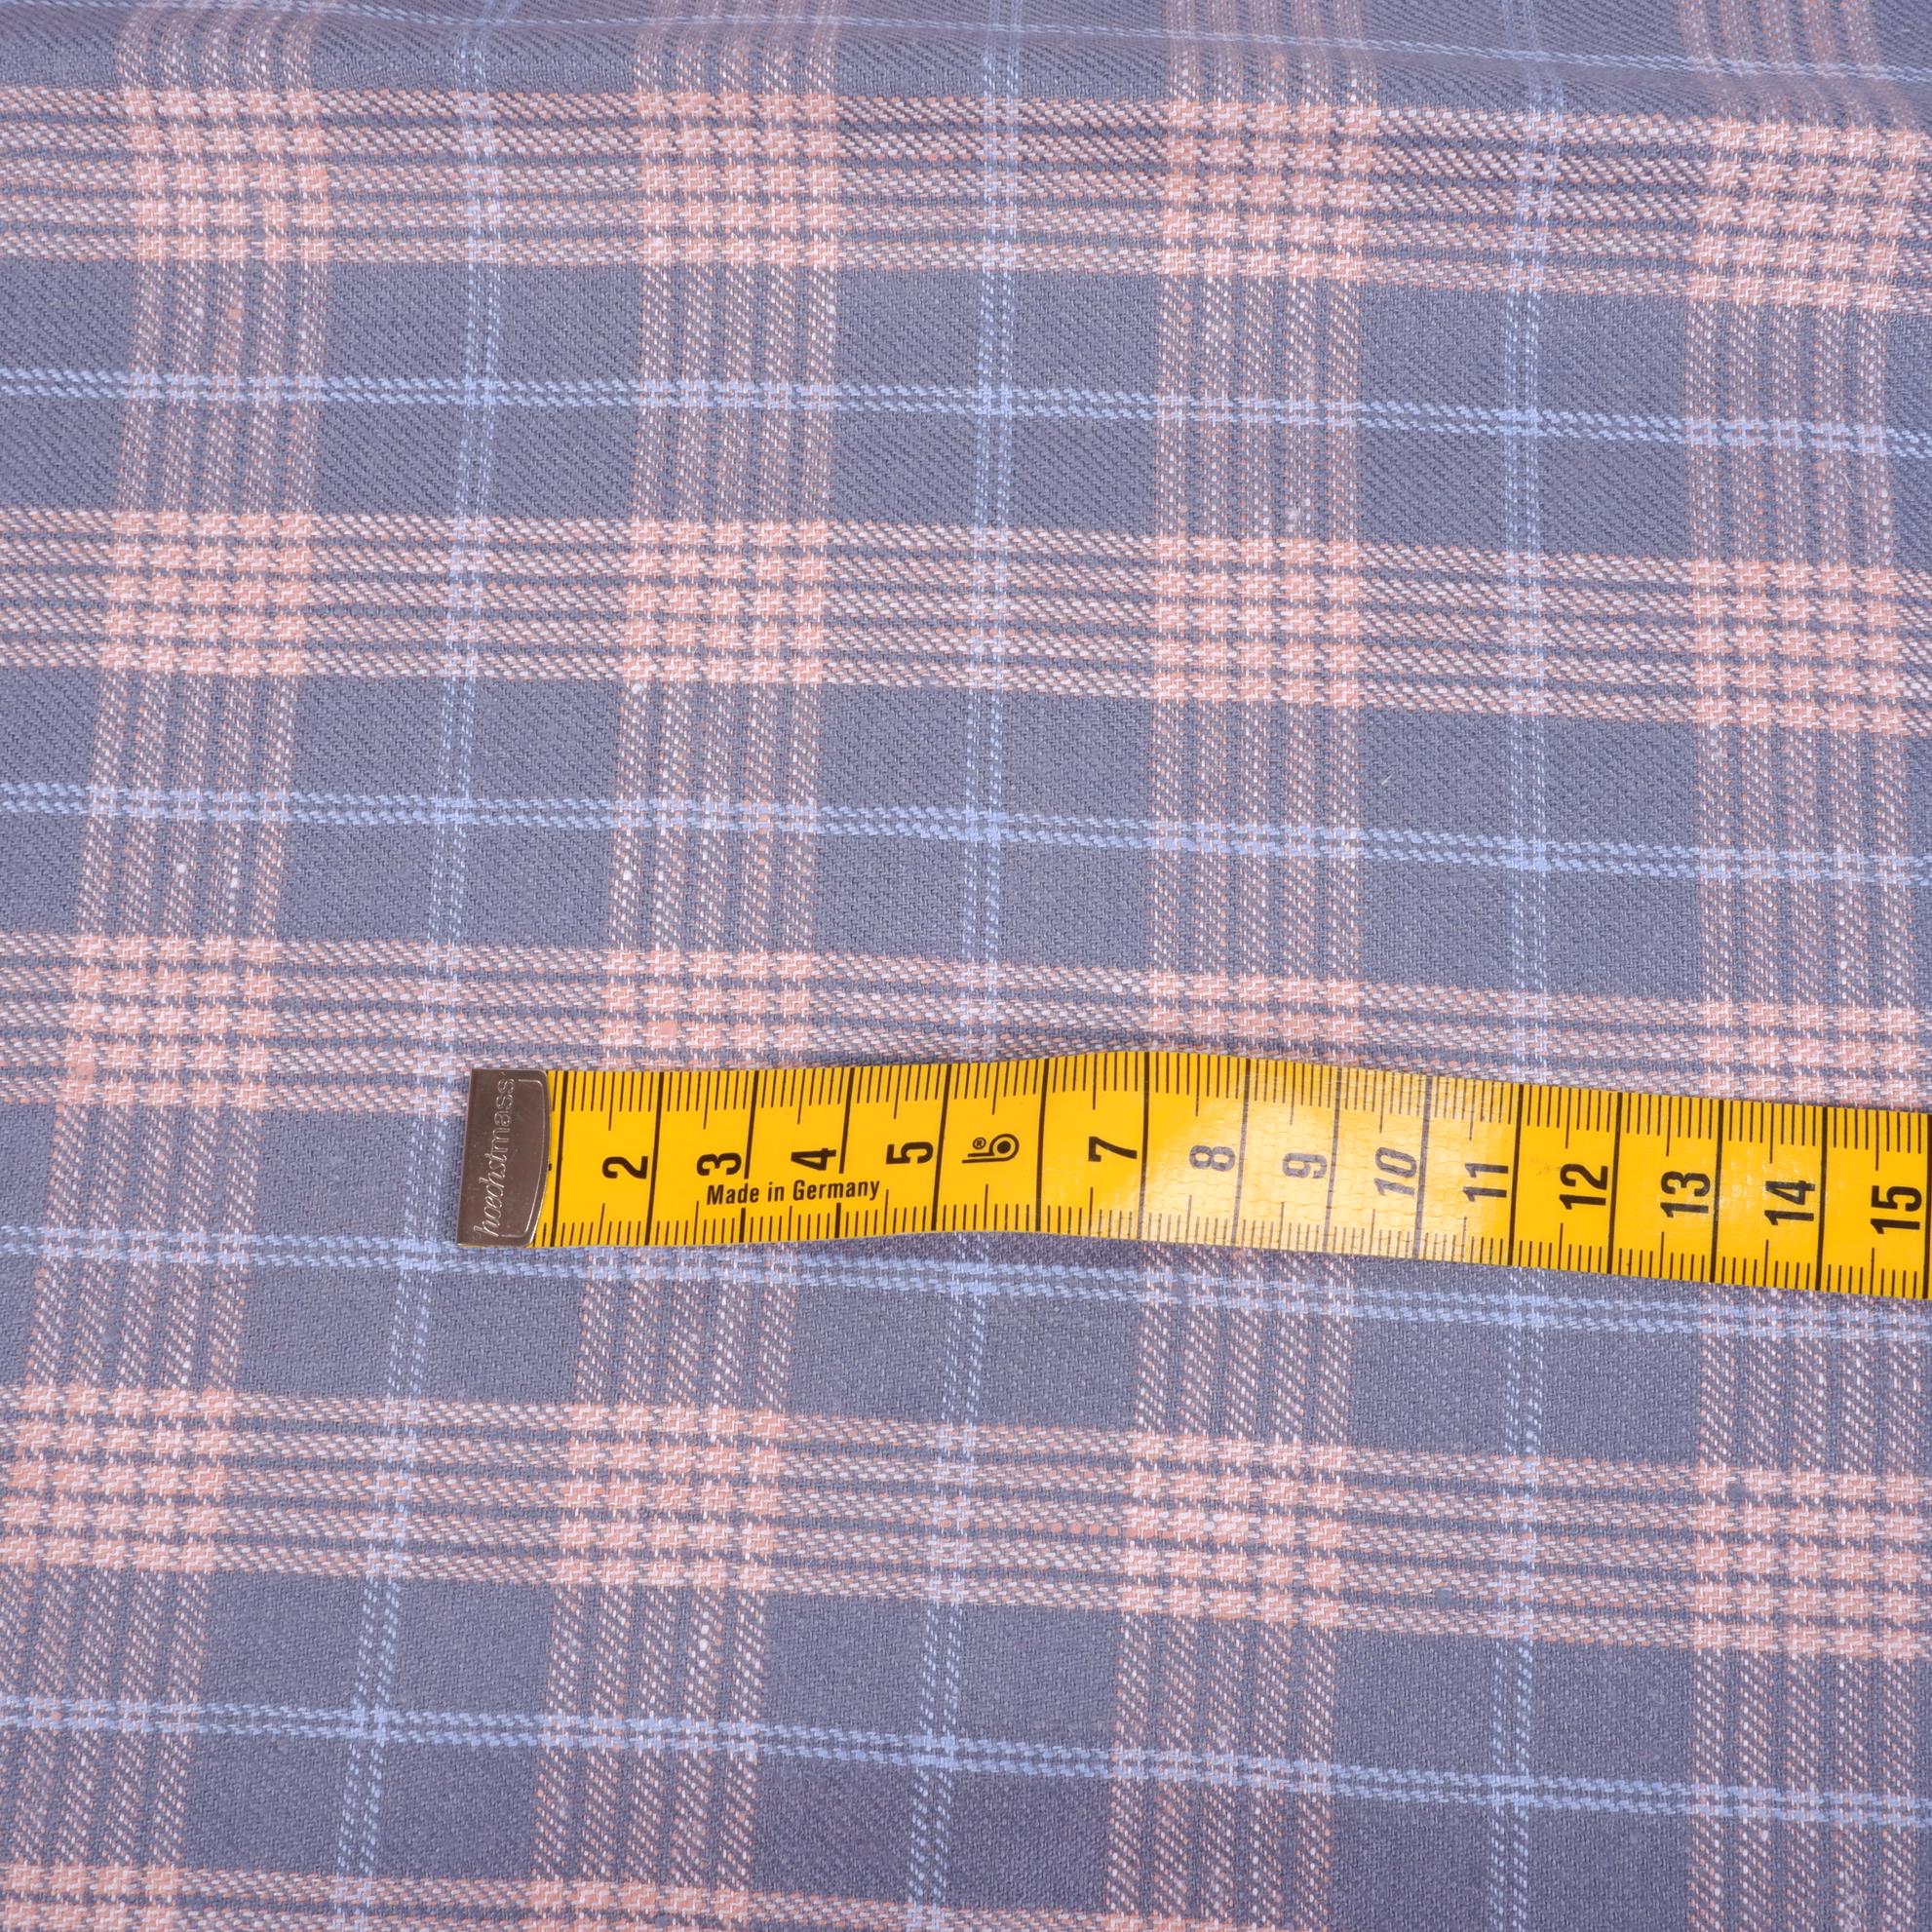 Grey - pink checked twill - 9951P - LithuanianLinen